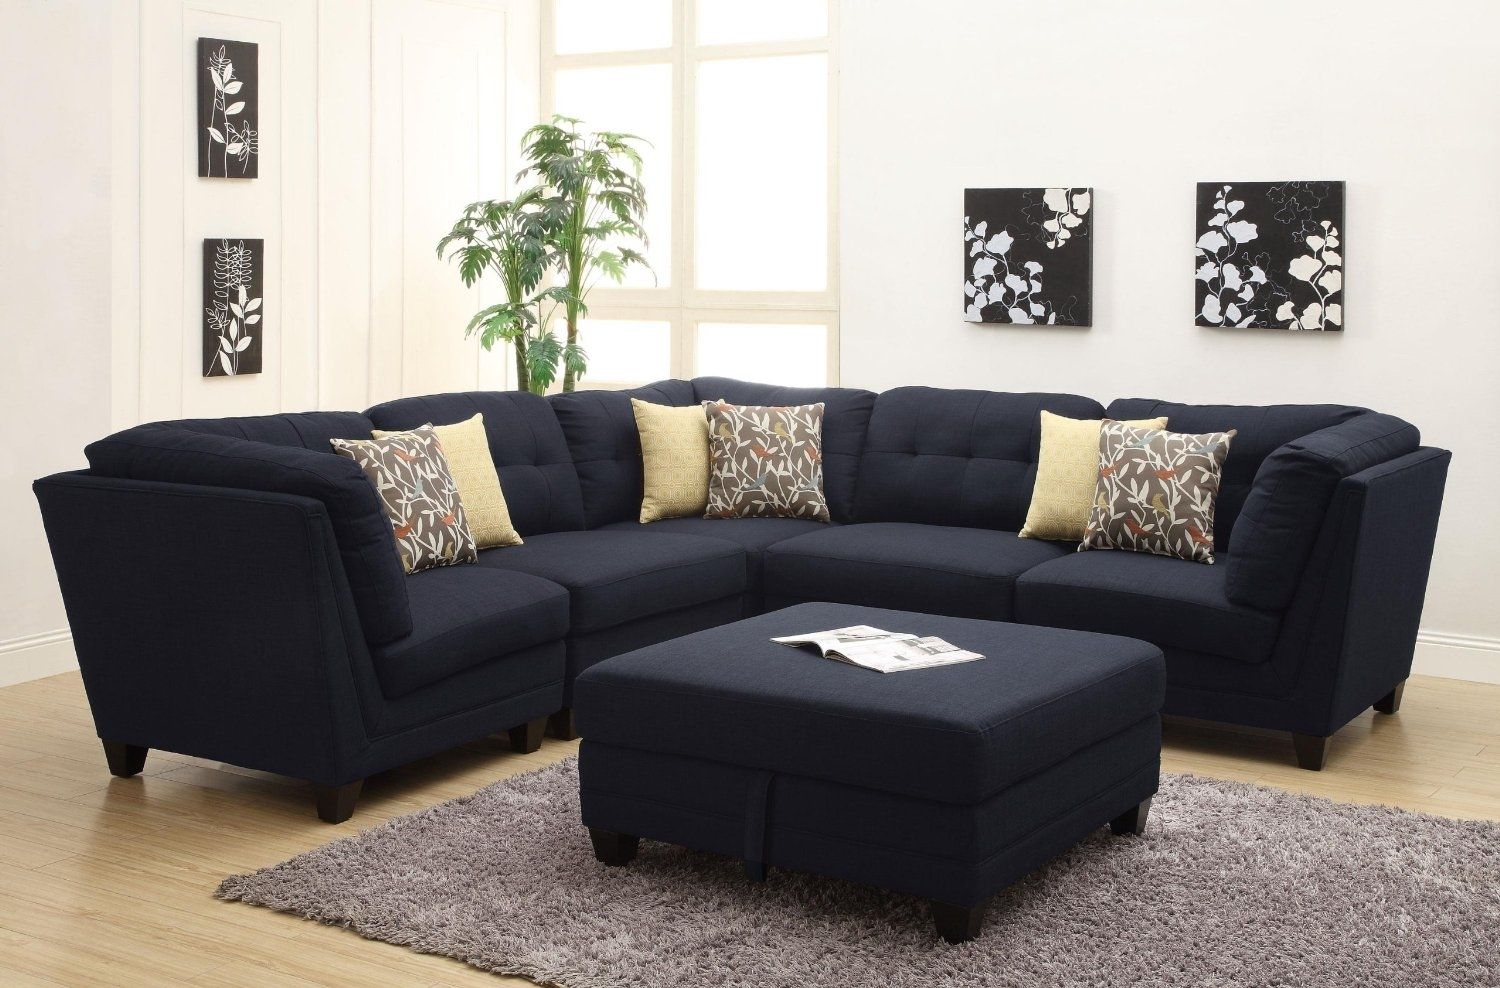 New Sectional Sofas Tulsa 99 With Additional Gray Sectional Sofa Inside Tulsa Sectional Sofas 